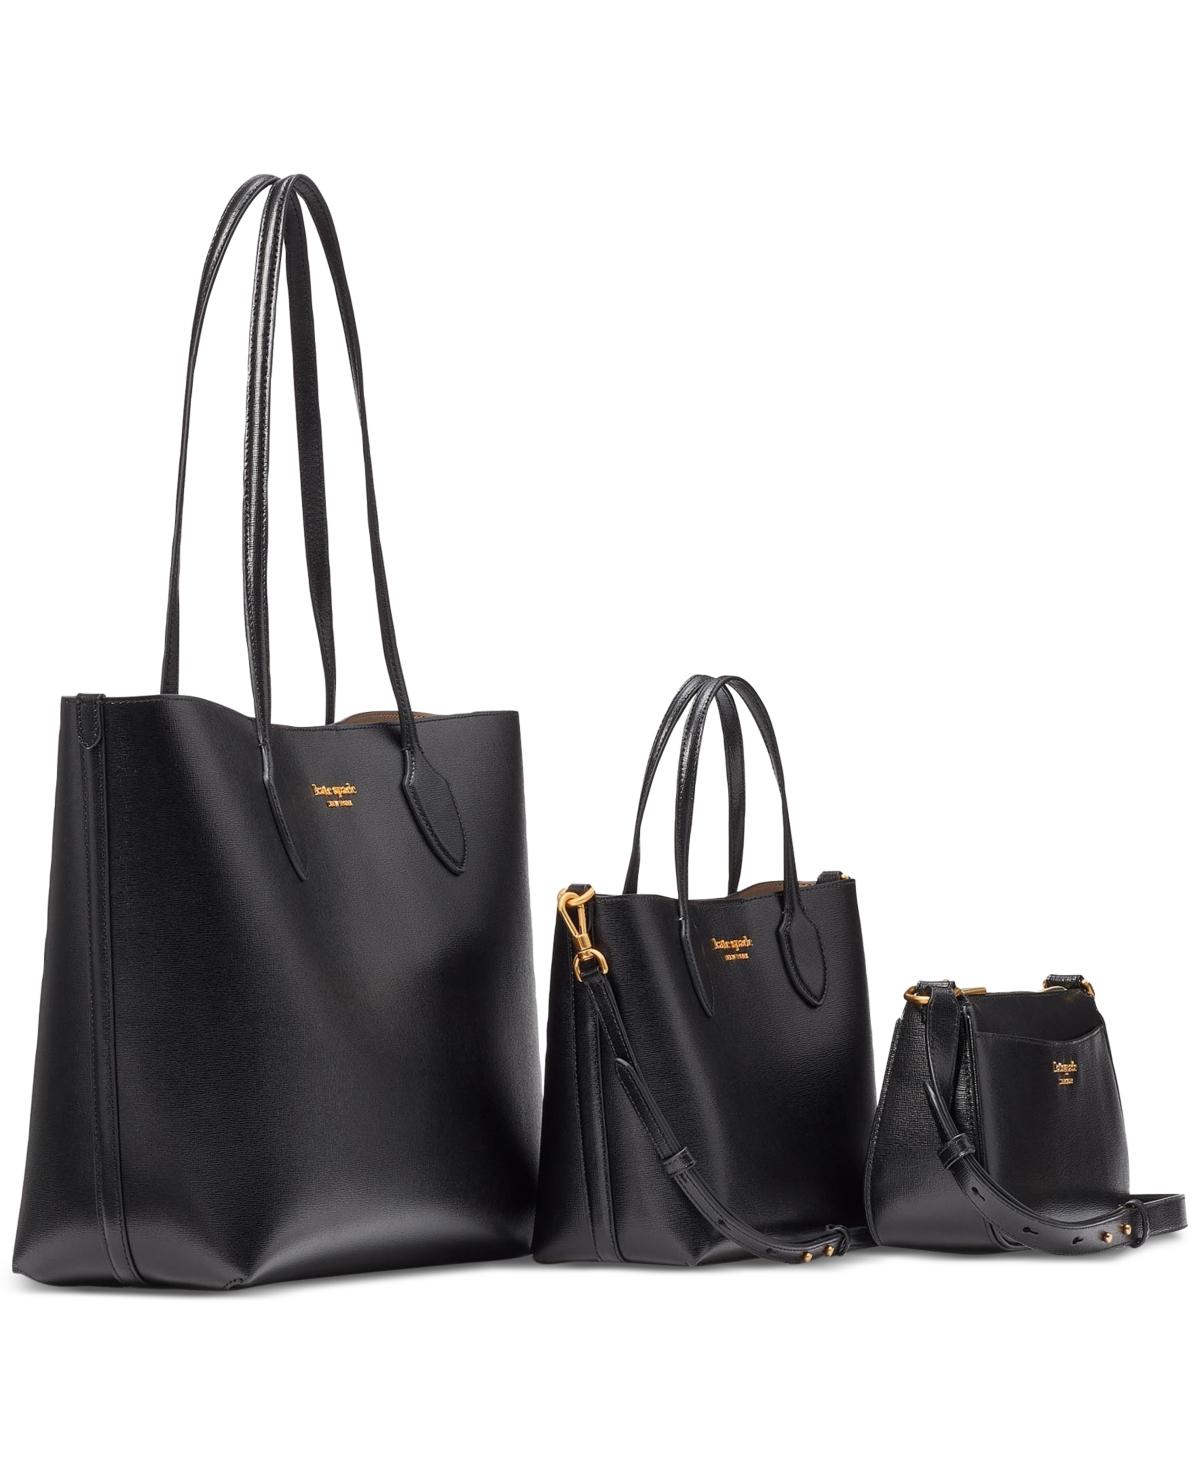 Kate Spade 24-Hour Flash Deal: Get This $460 Tote Bag for Just $99